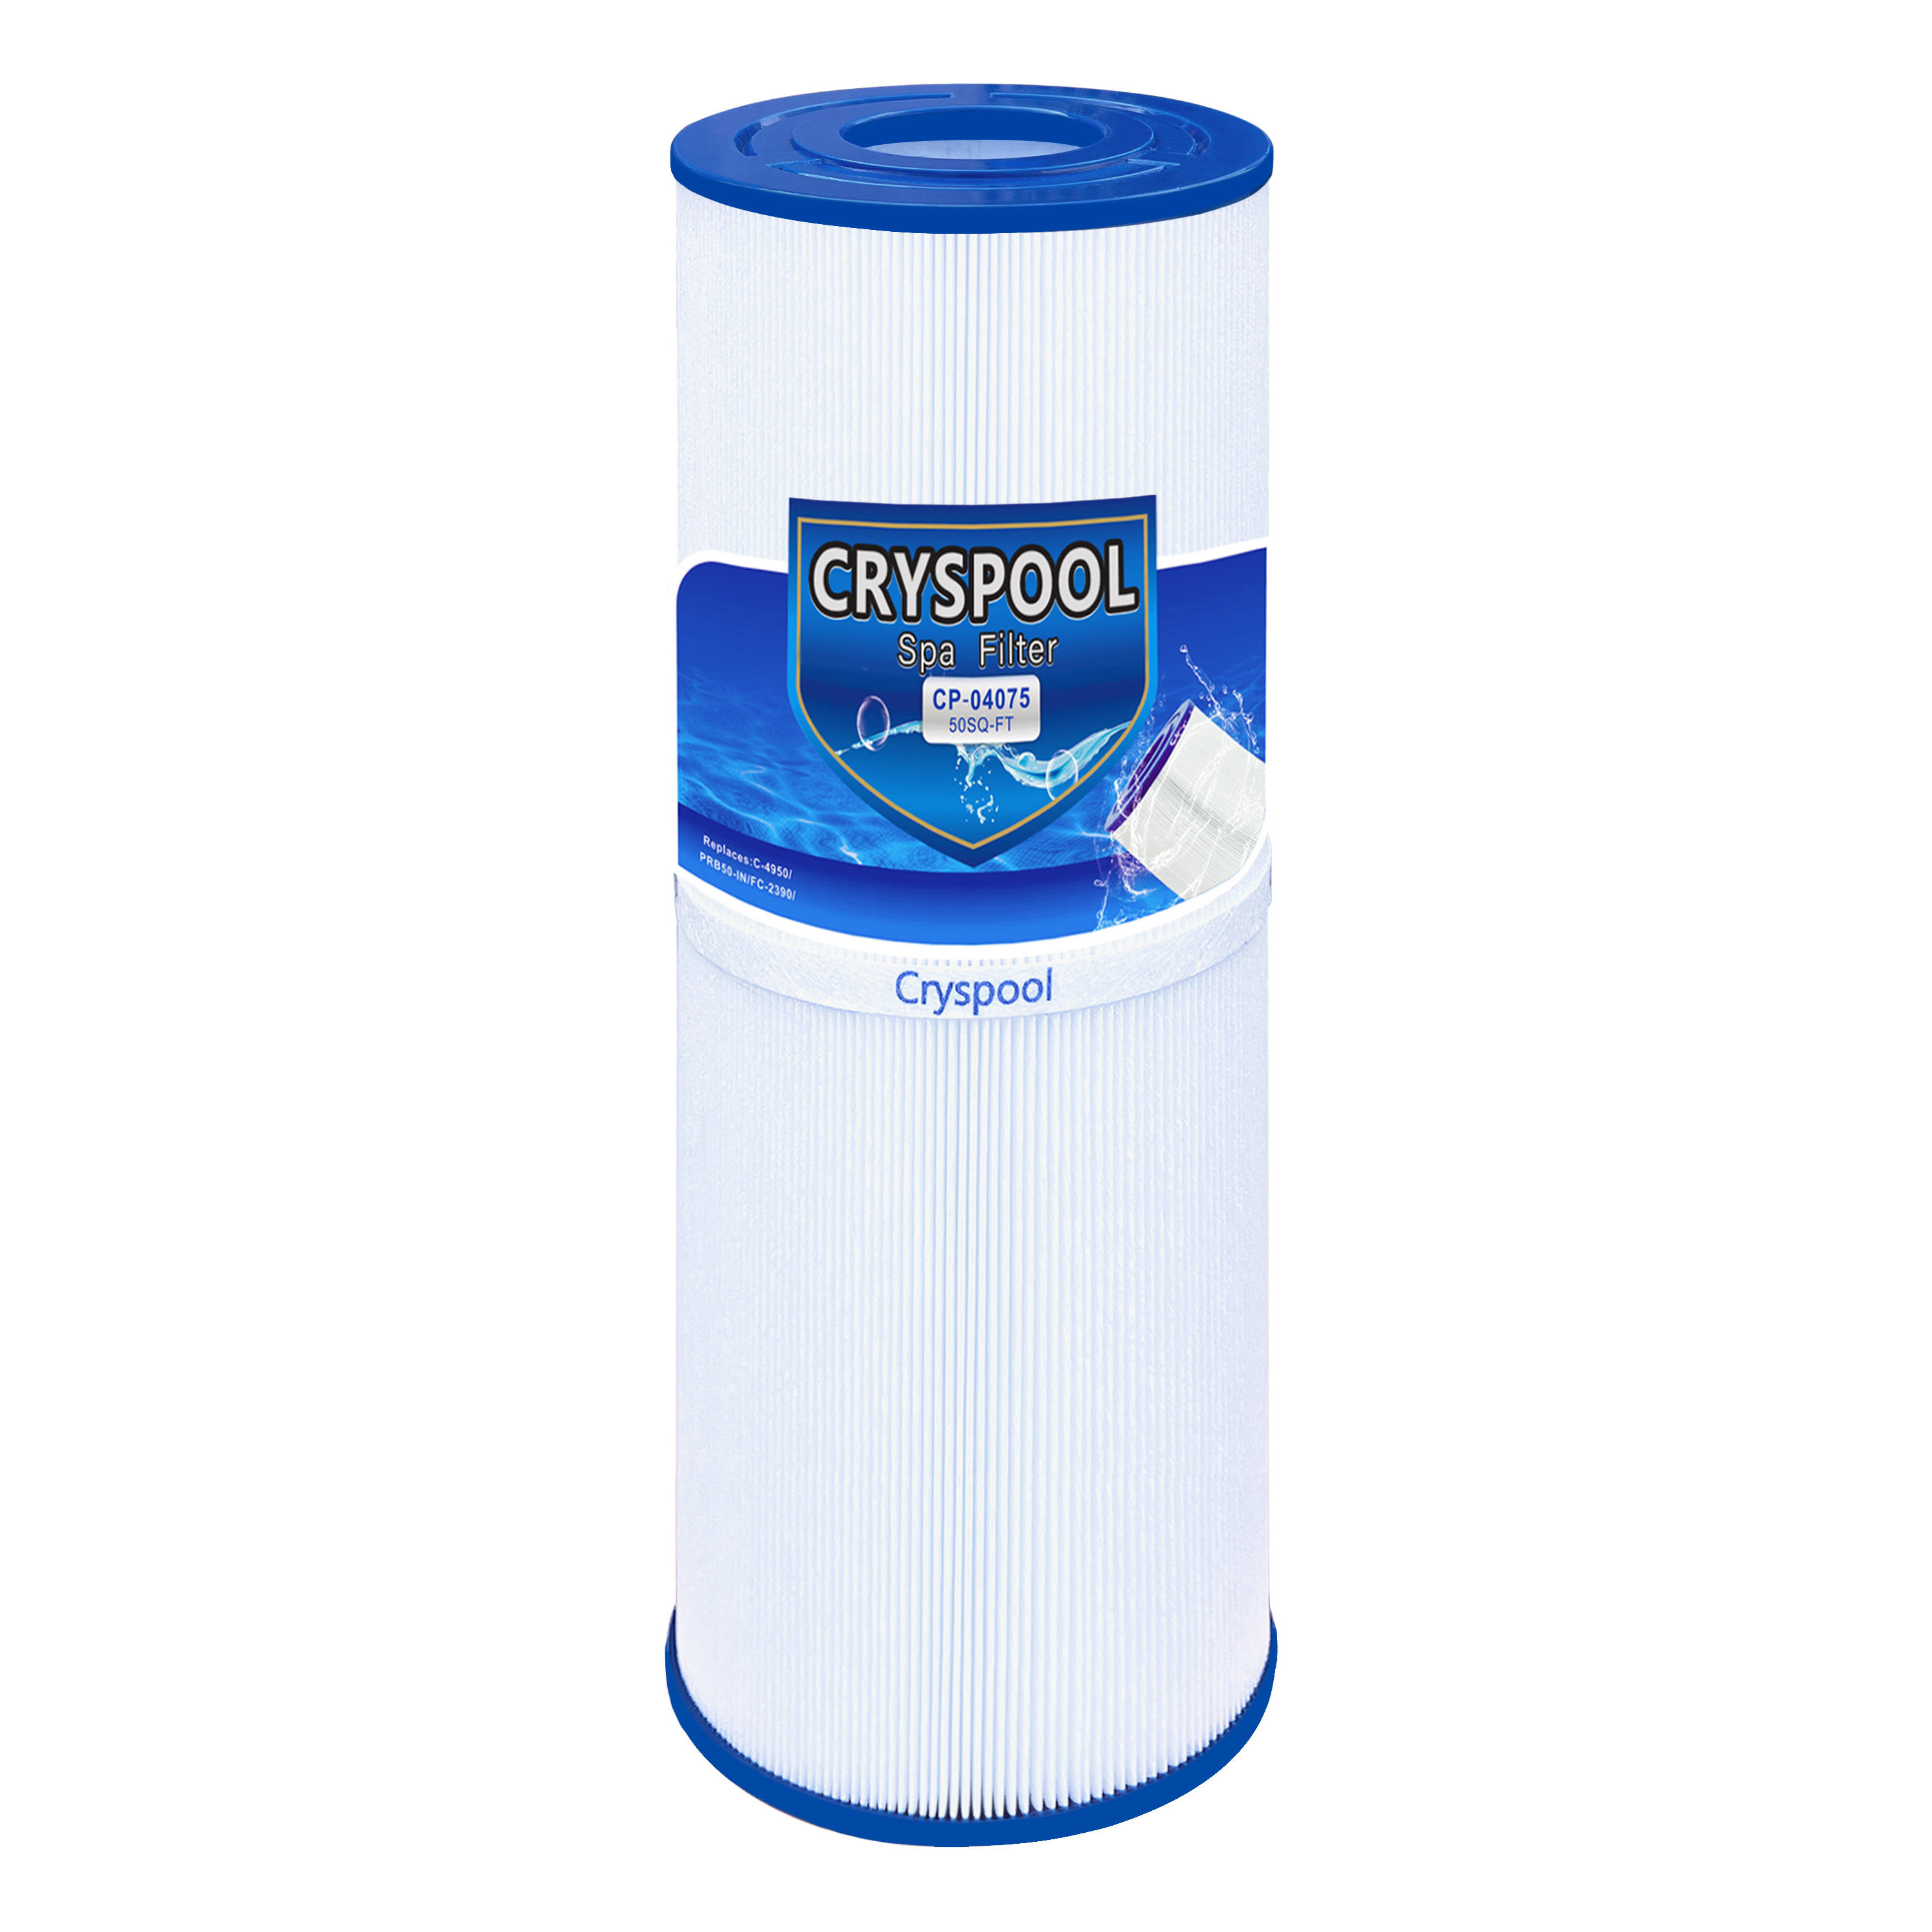 Cryspool 50 sq. ft Spa Filter Replaces Unicel C-4950, PRB50-IN, Filbur FC-2390, Guardian 413-212-02, J200 Series Filter, 03FIL1600,373045, Cal Spa Hot Tub Filter Replacements Featured Image